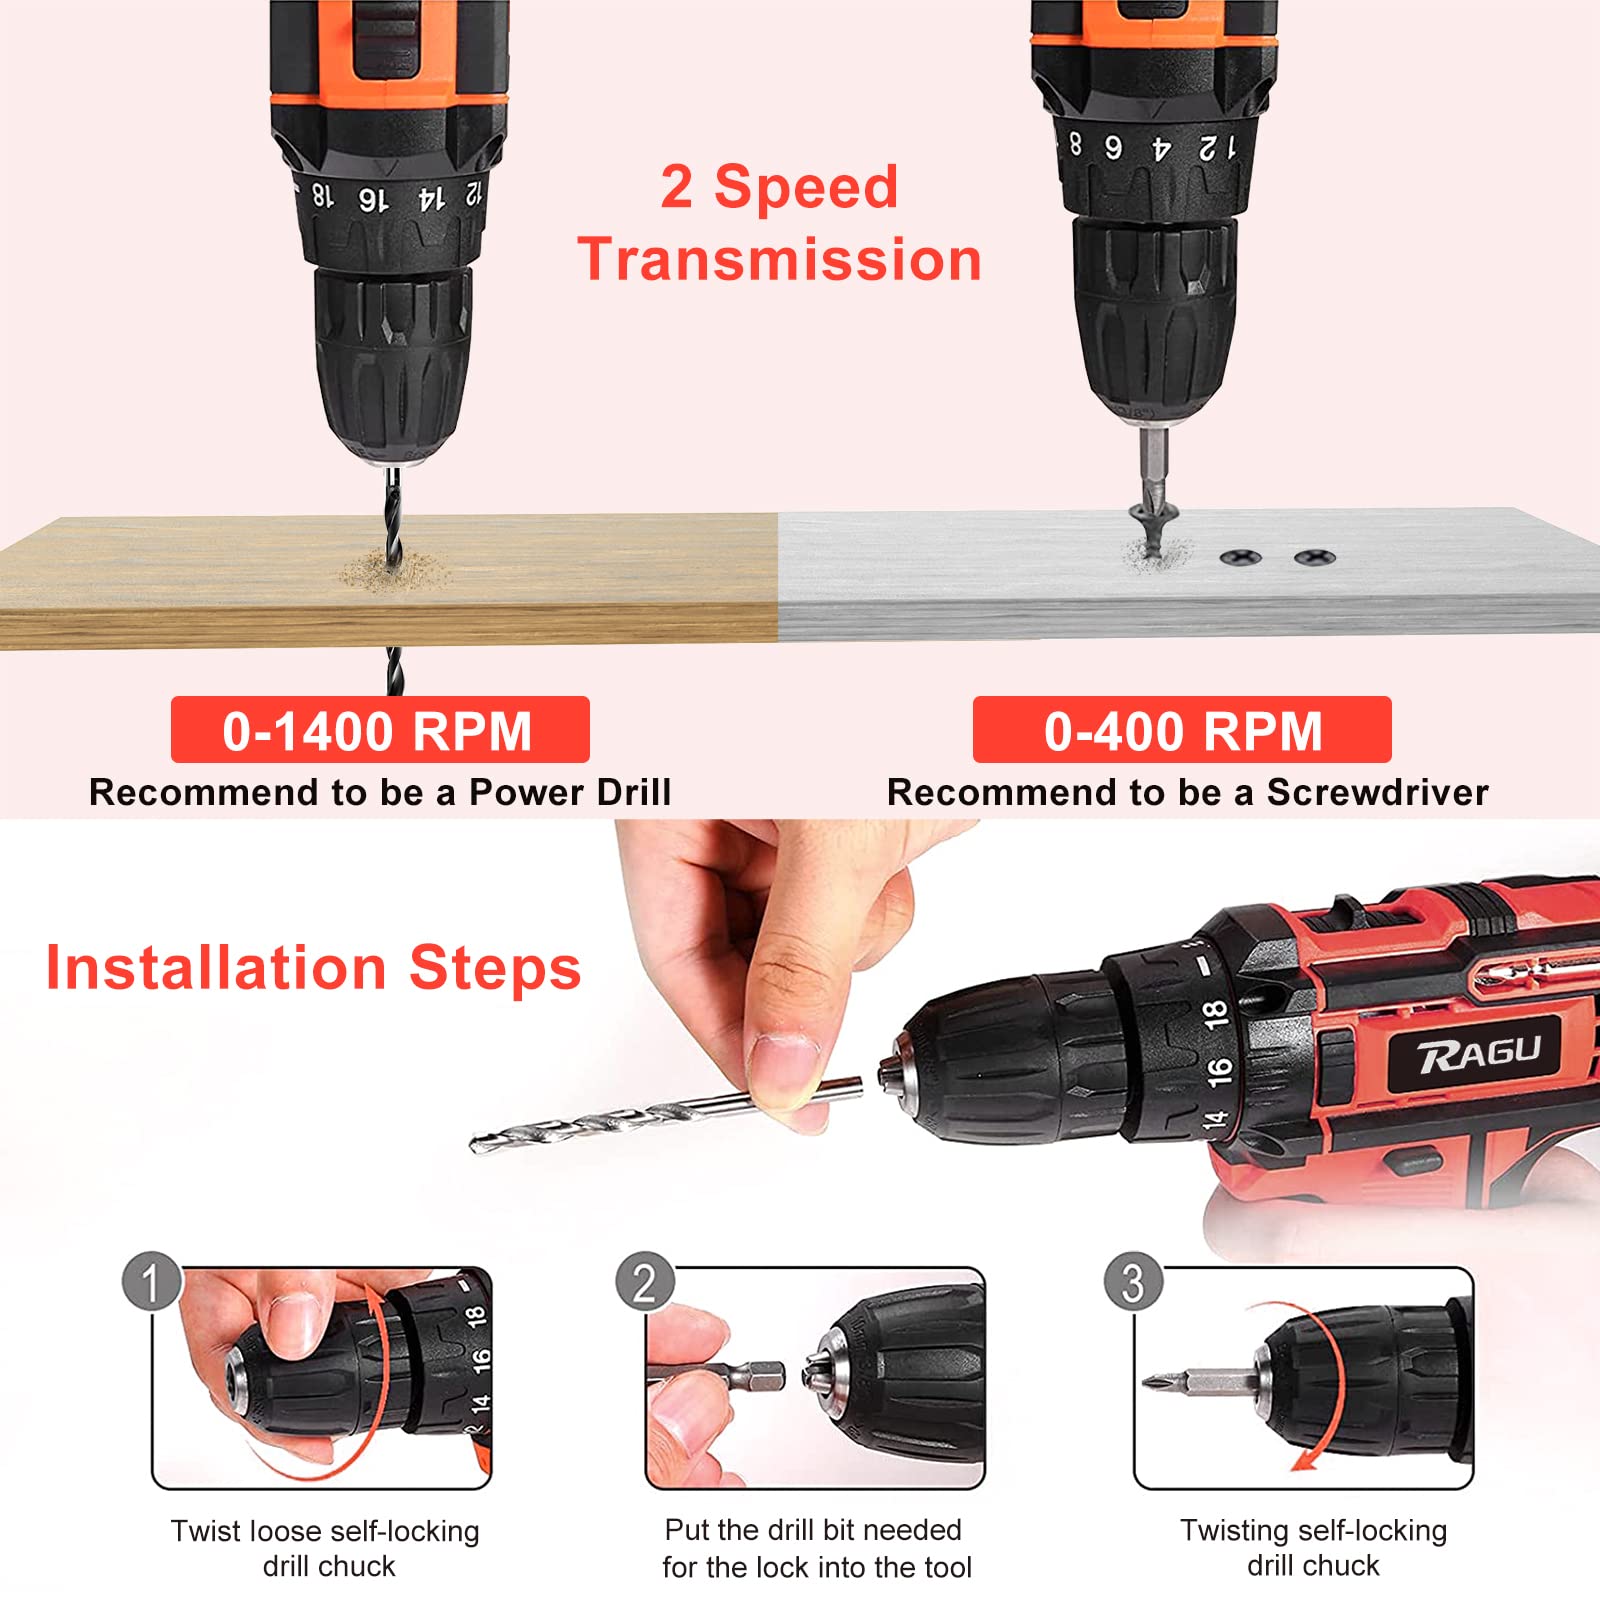 Cordless Drill 12v, 34pcs Drill Driver Set with 2 Batteries, Drill Set with 2 Variable Speed 3/8'' Keyless Chuck for Drilling Wood, Ceramics